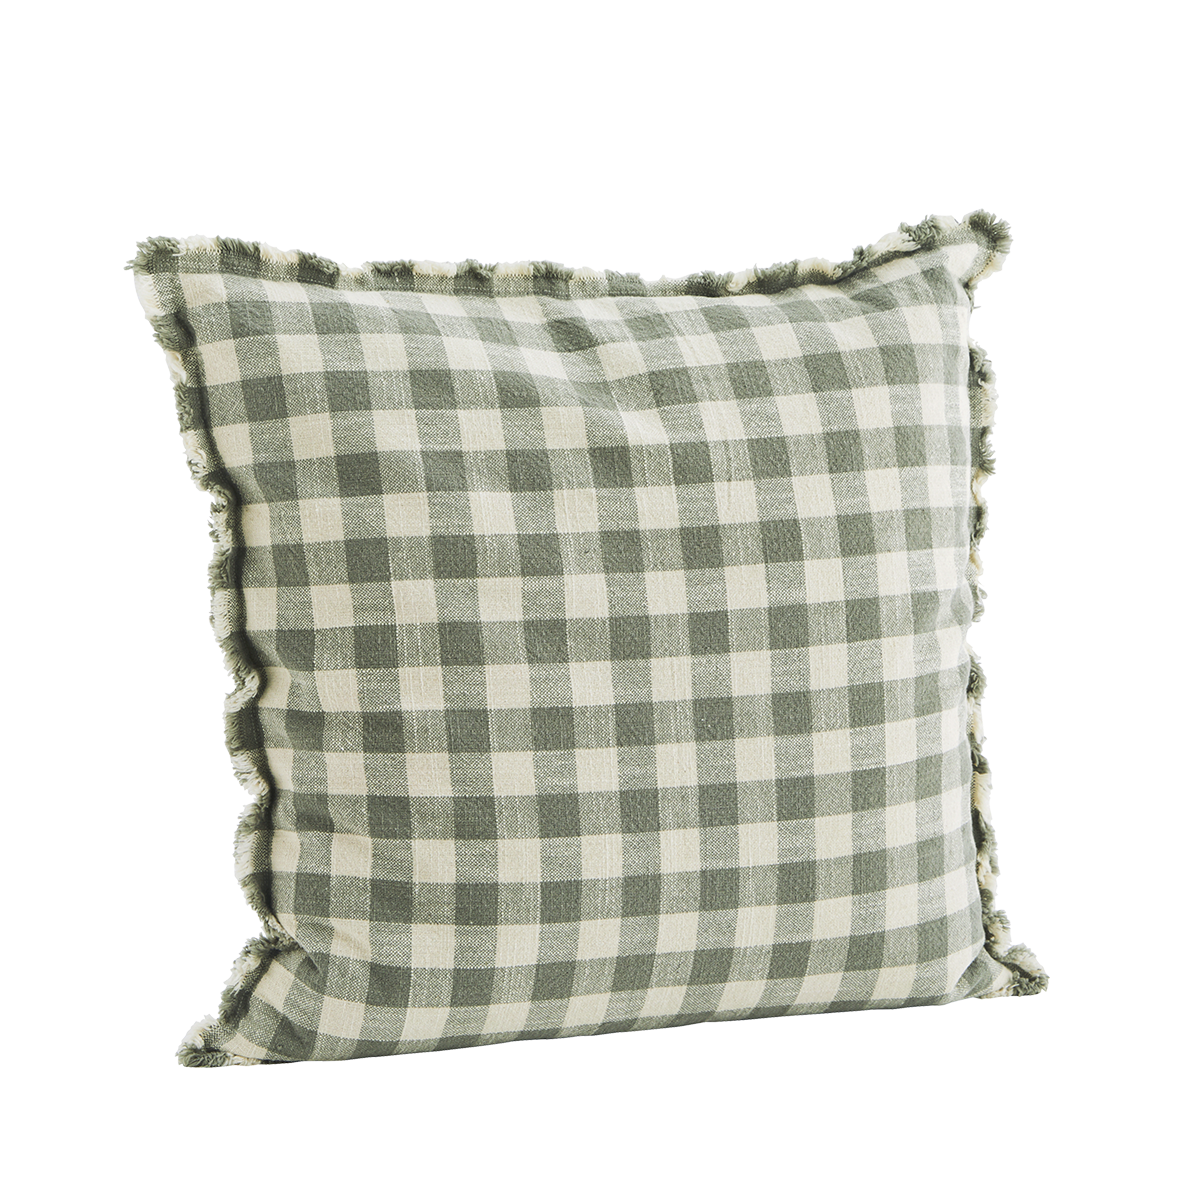 Checked cushion cover w/ fringes